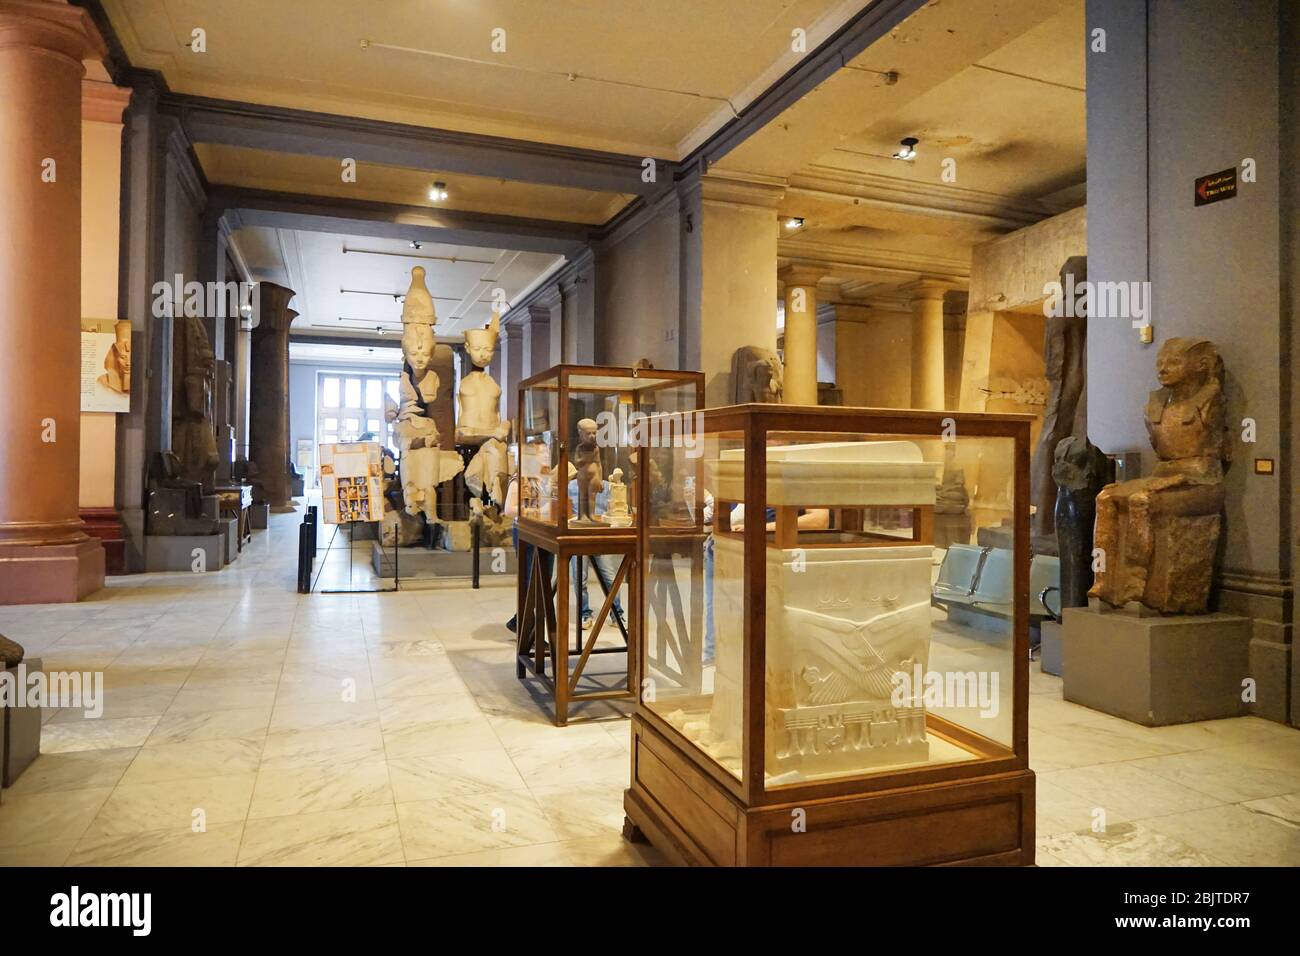 CAIRO, EGYPT - NOVEMBER 19, 2017: The Museum of Egyptian Antiquities - famous tourist attraction Stock Photo